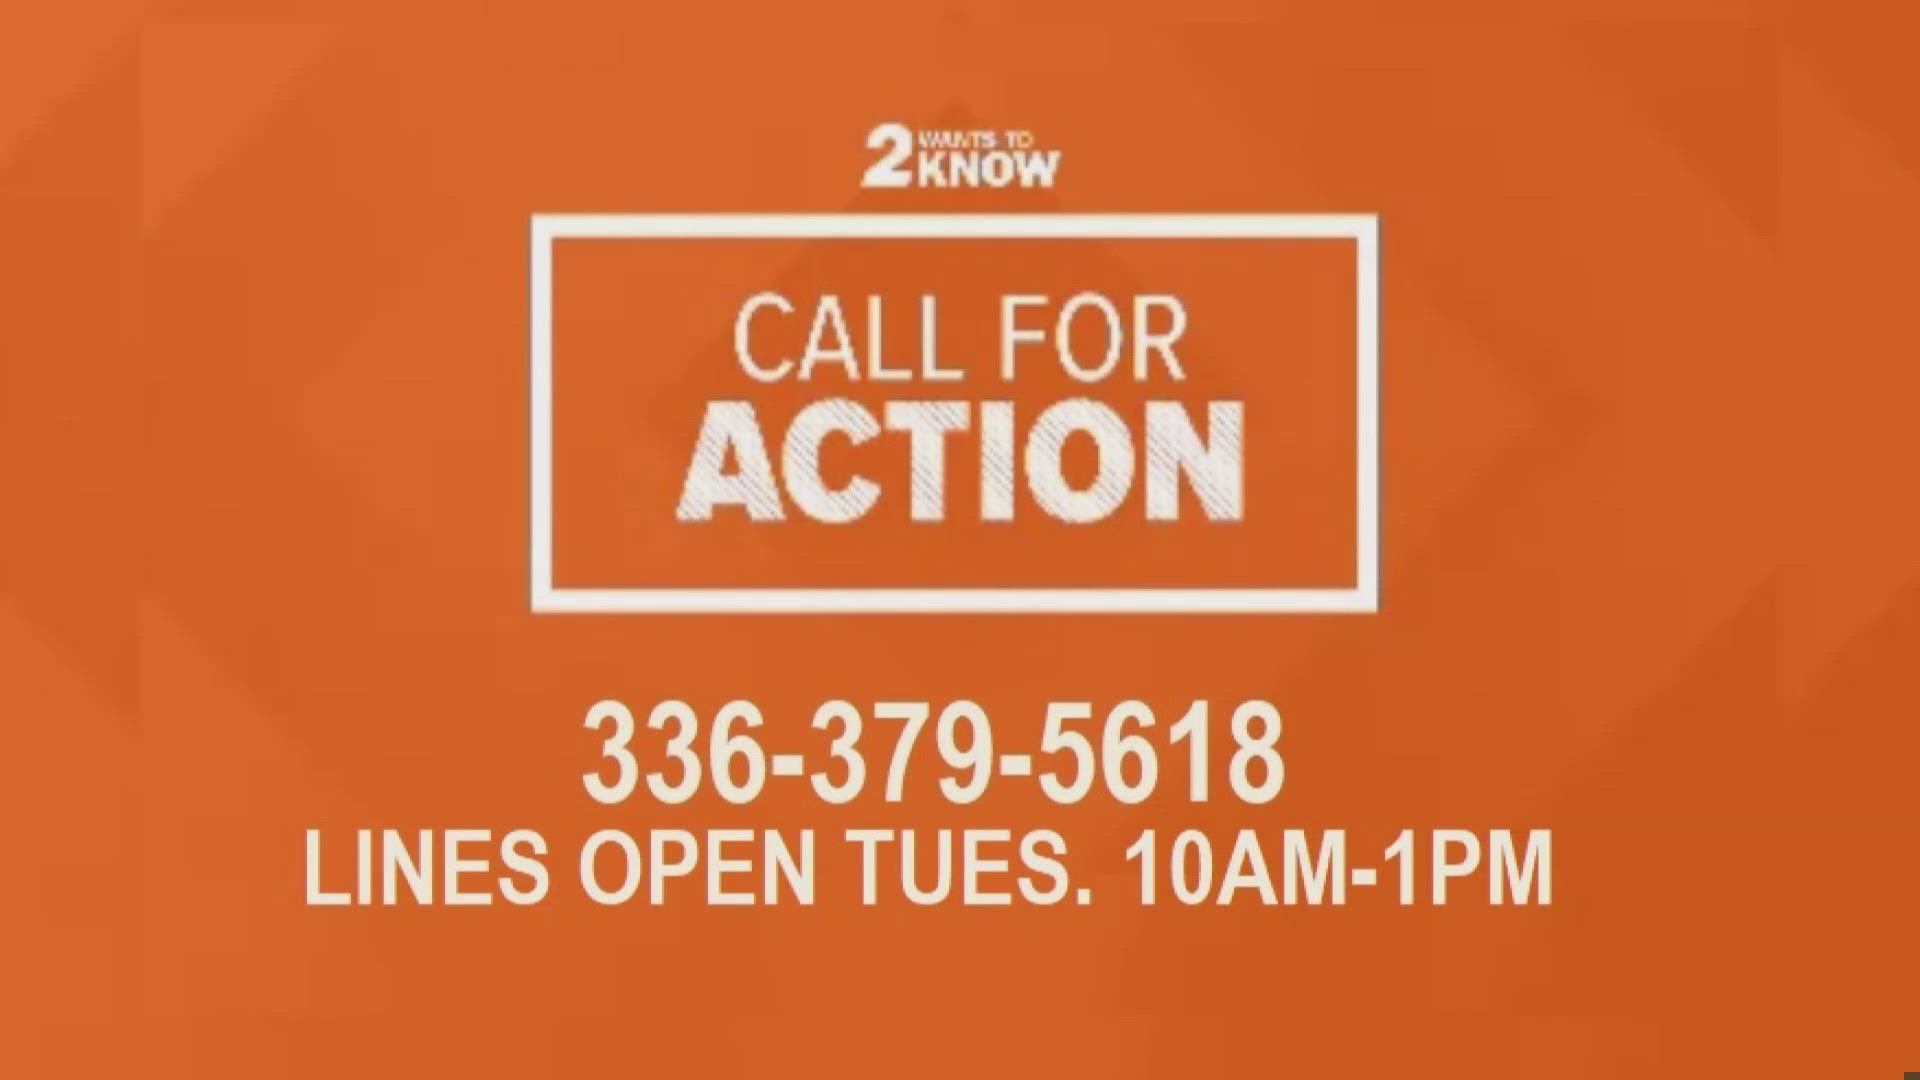 If you have a consumer issue you need help with, you call the Call For Action office 336-379-5618.